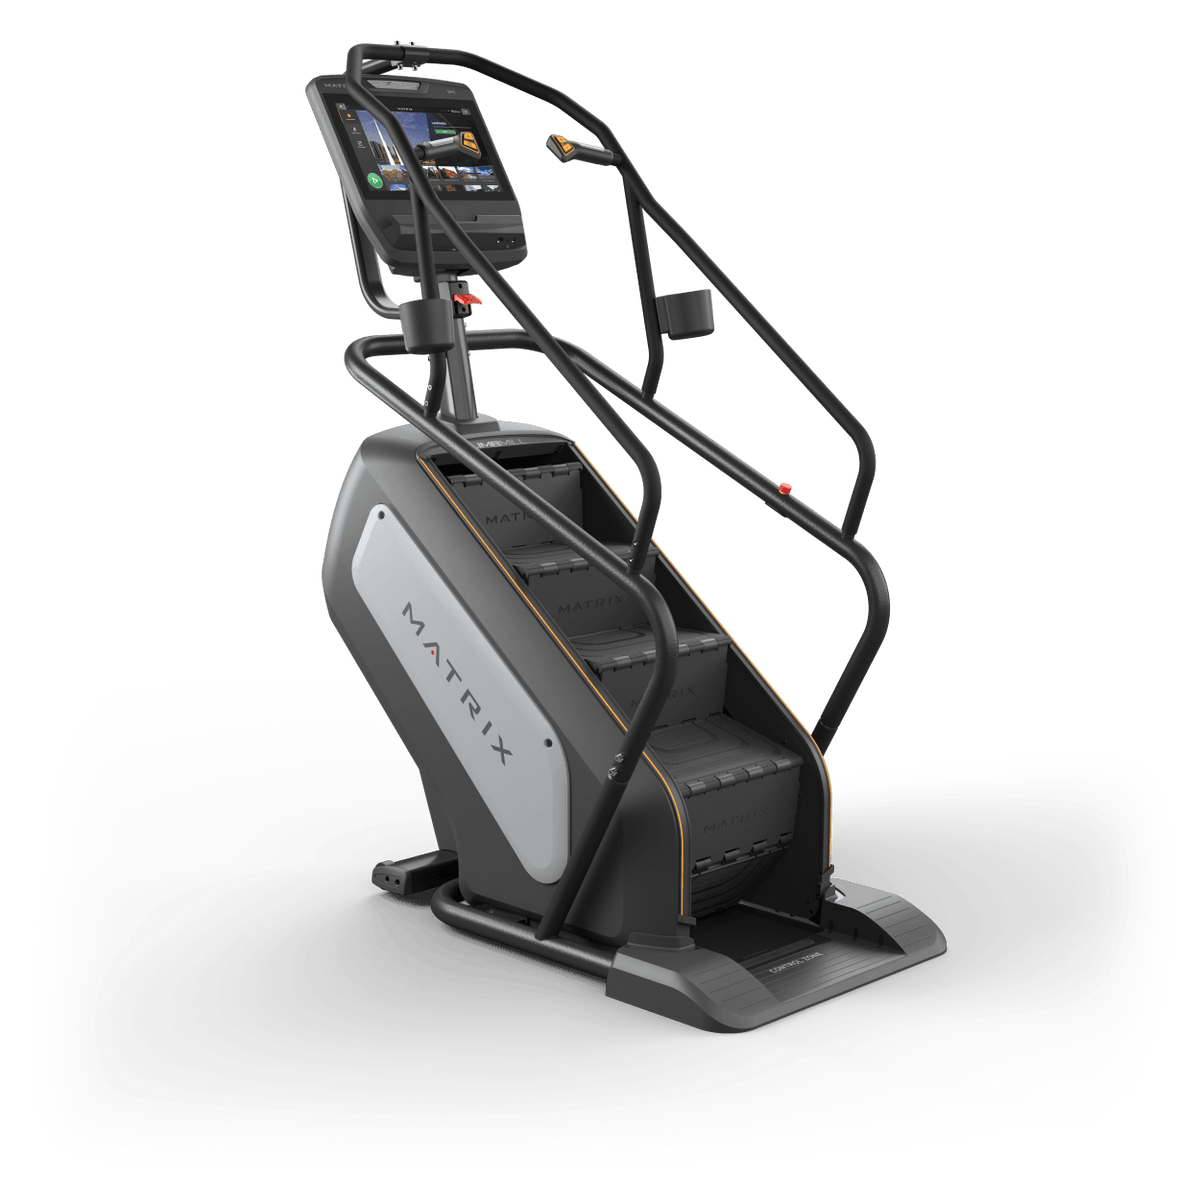 Matrix Fitness Performance Climbmill with Touch XL Console full view | Fitness Experience